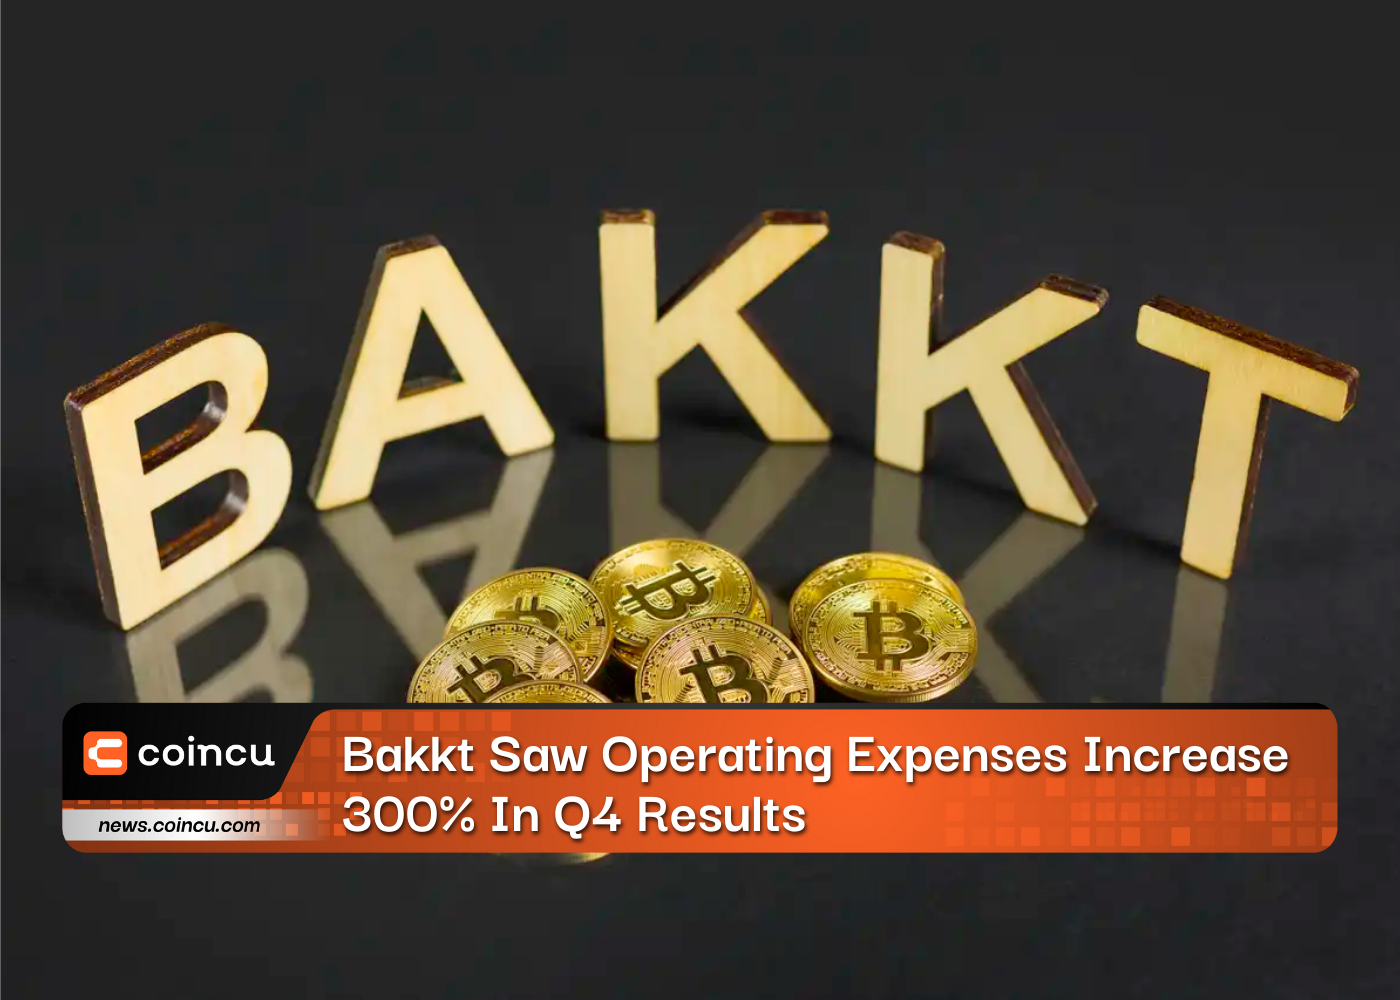 Bakkt Saw Operating Expenses Increase 300% In Q4 Results